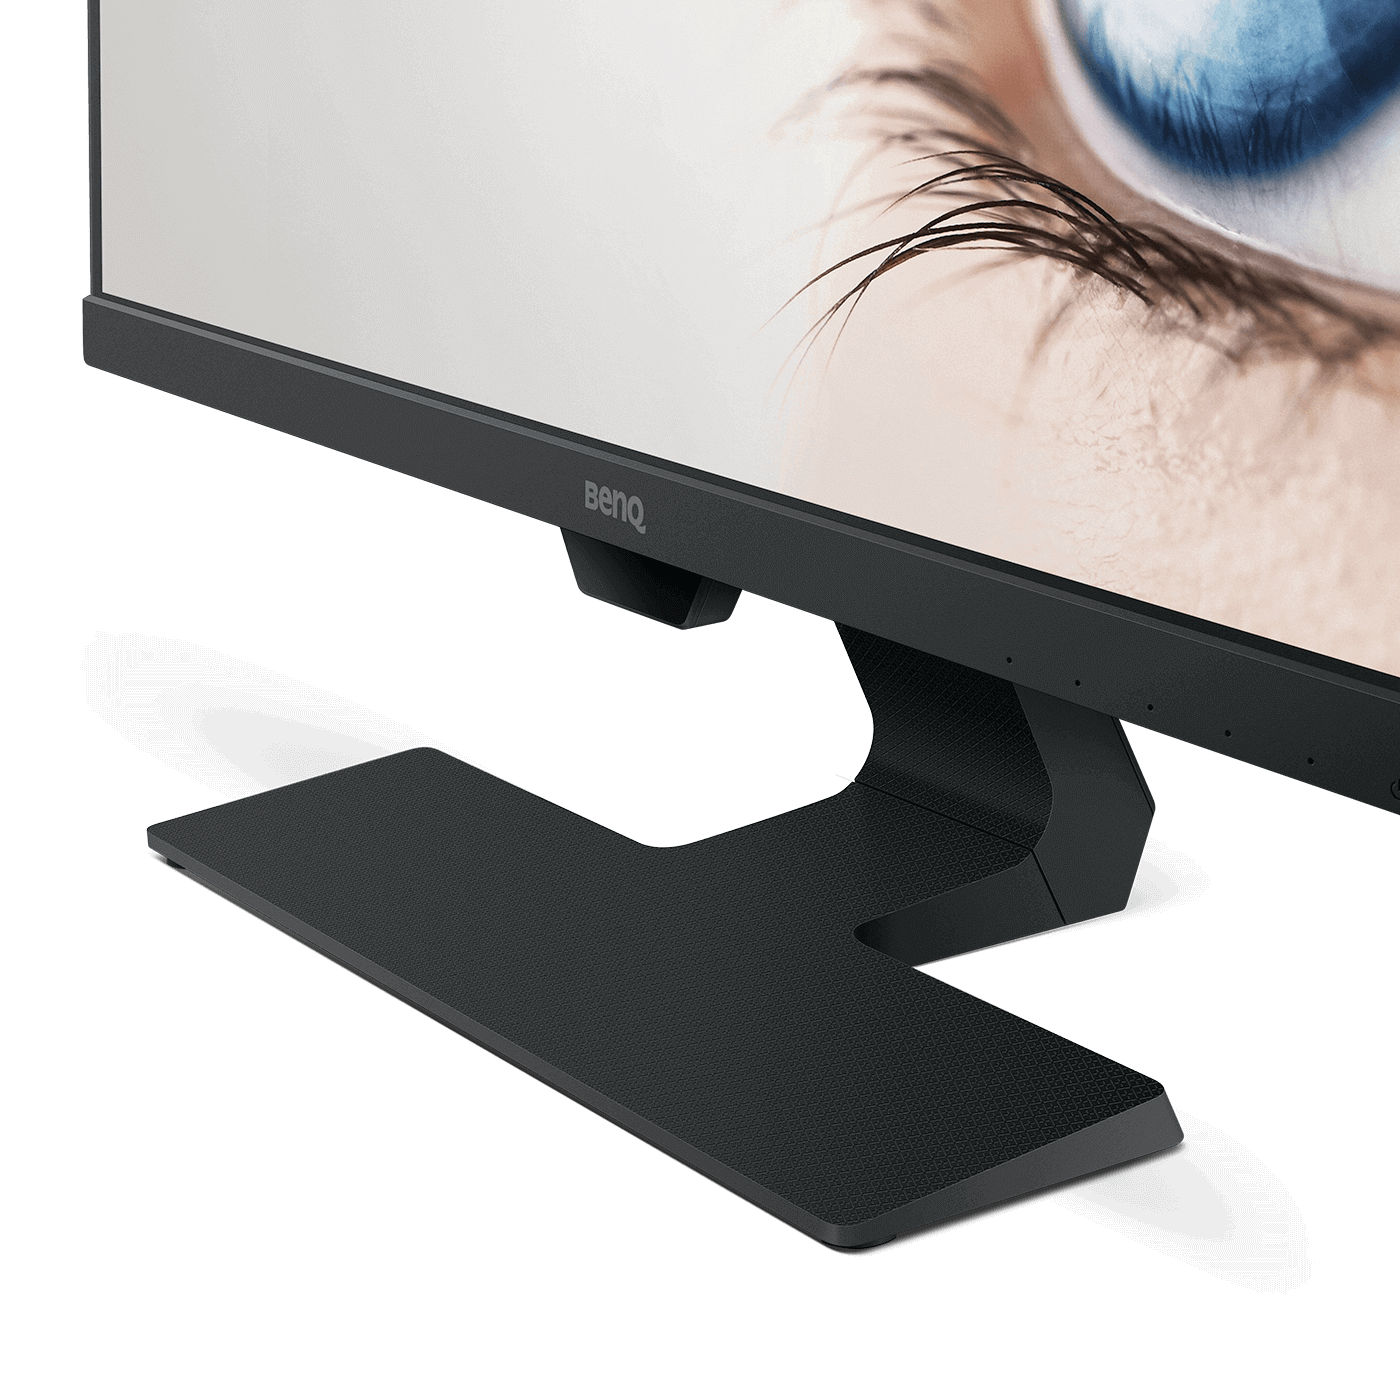 BenQ BenQ GW2480 24-inch 1080p IPS Widescreen LED Monitor HDMI with Built-in Speakers 